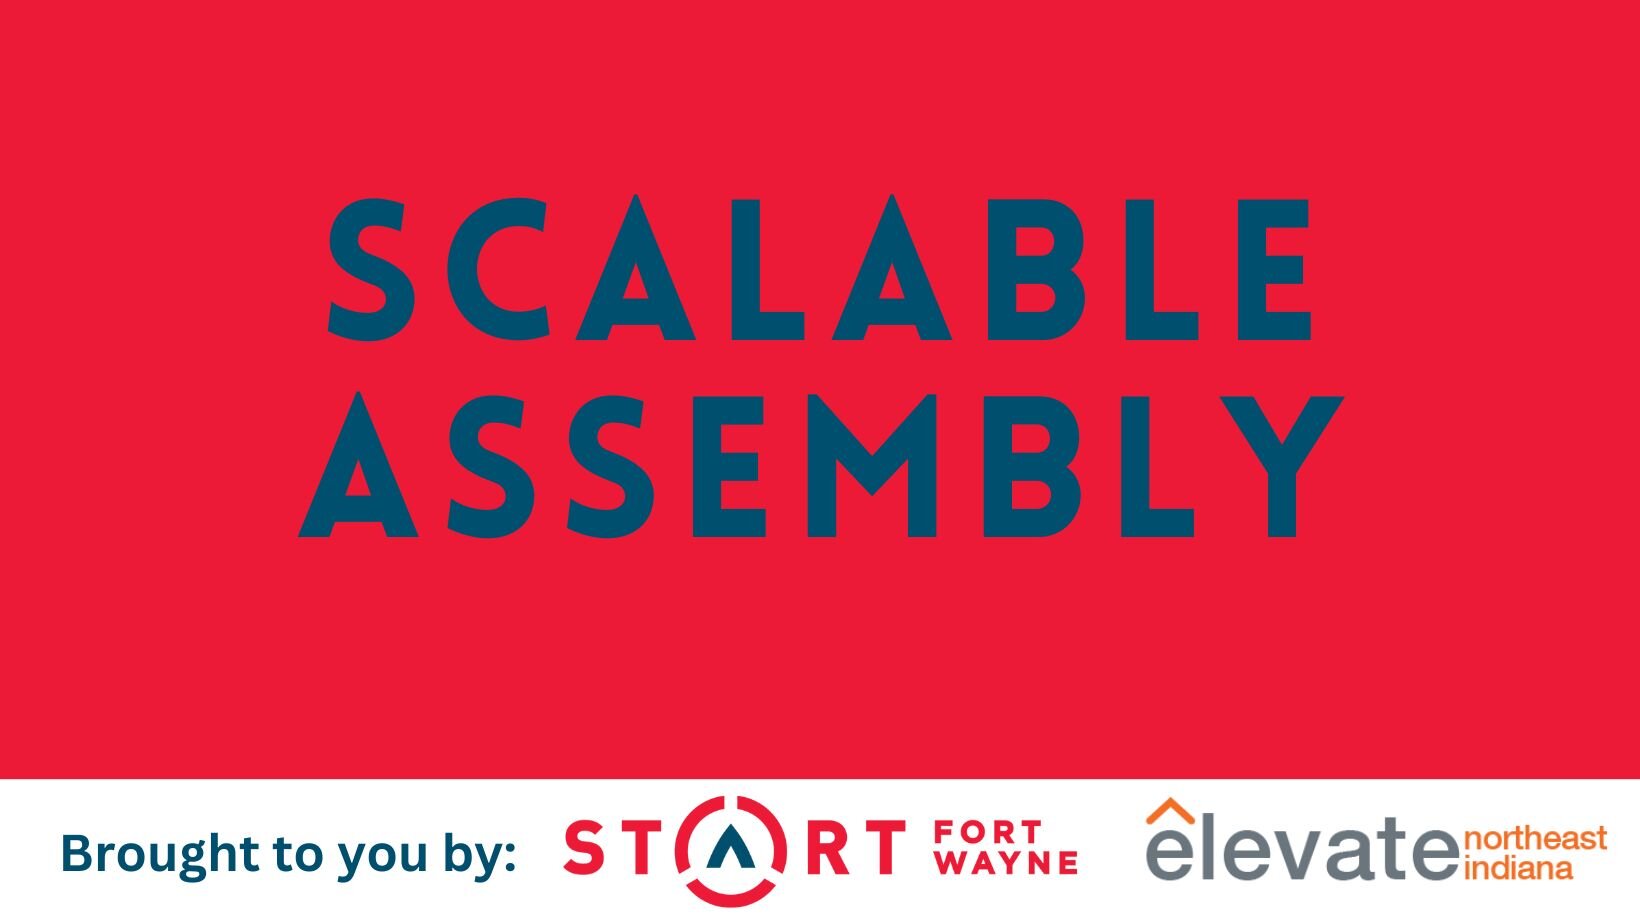 Through Scalable Assembly, Start Fort Wayne and Elevate Fort Wayne will work together to identify and grow scalable ventures in Northeast Indiana.